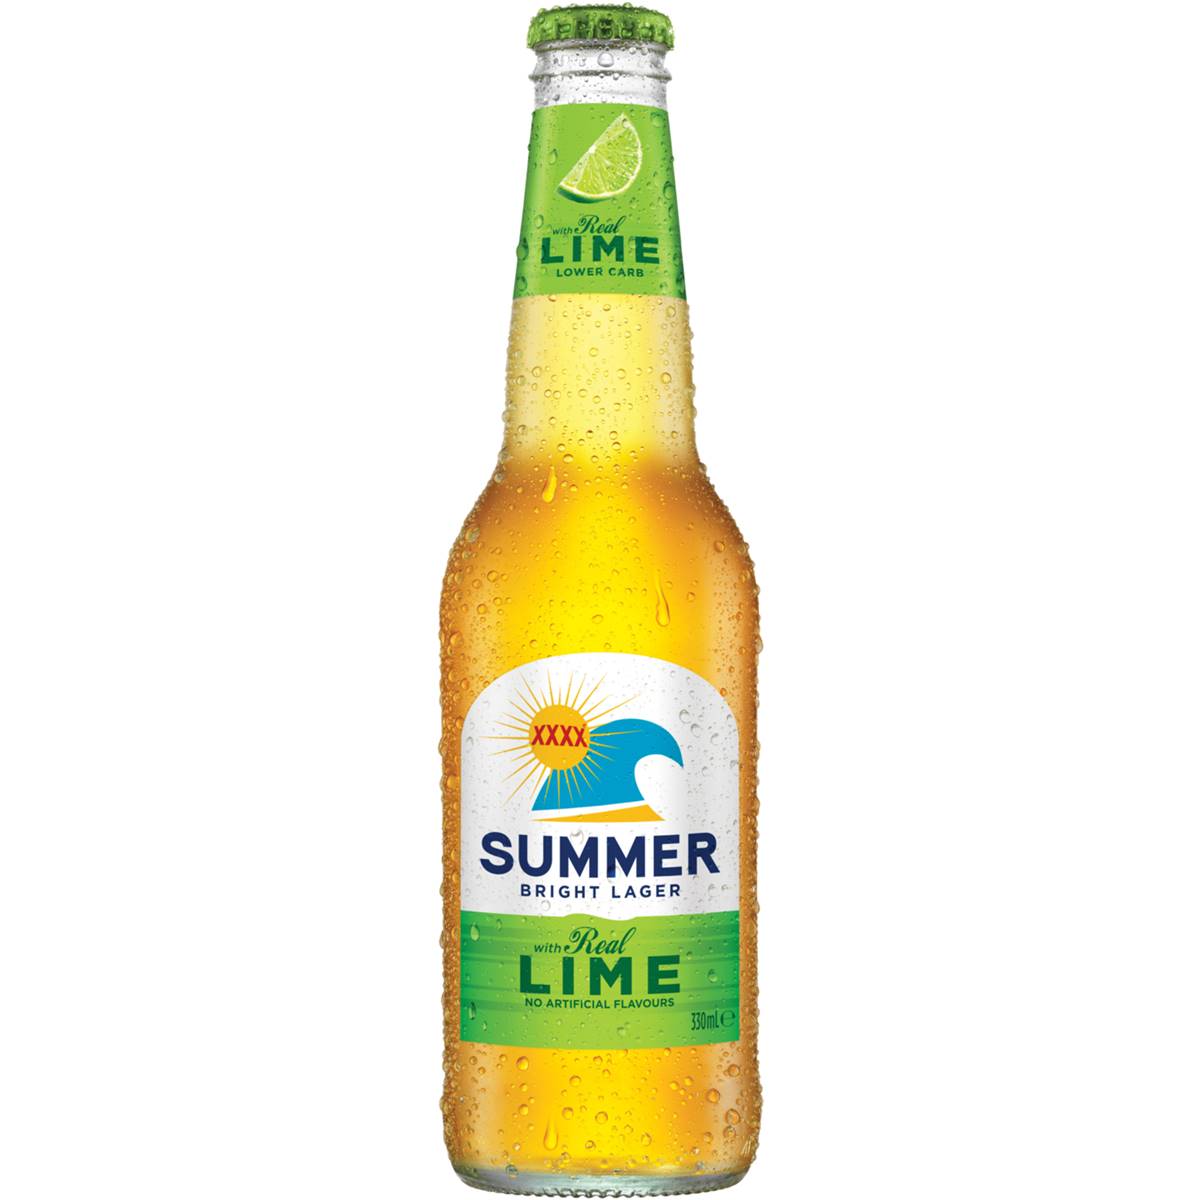 Calories in XXXX Summer Bright Ale With Lime Bottle